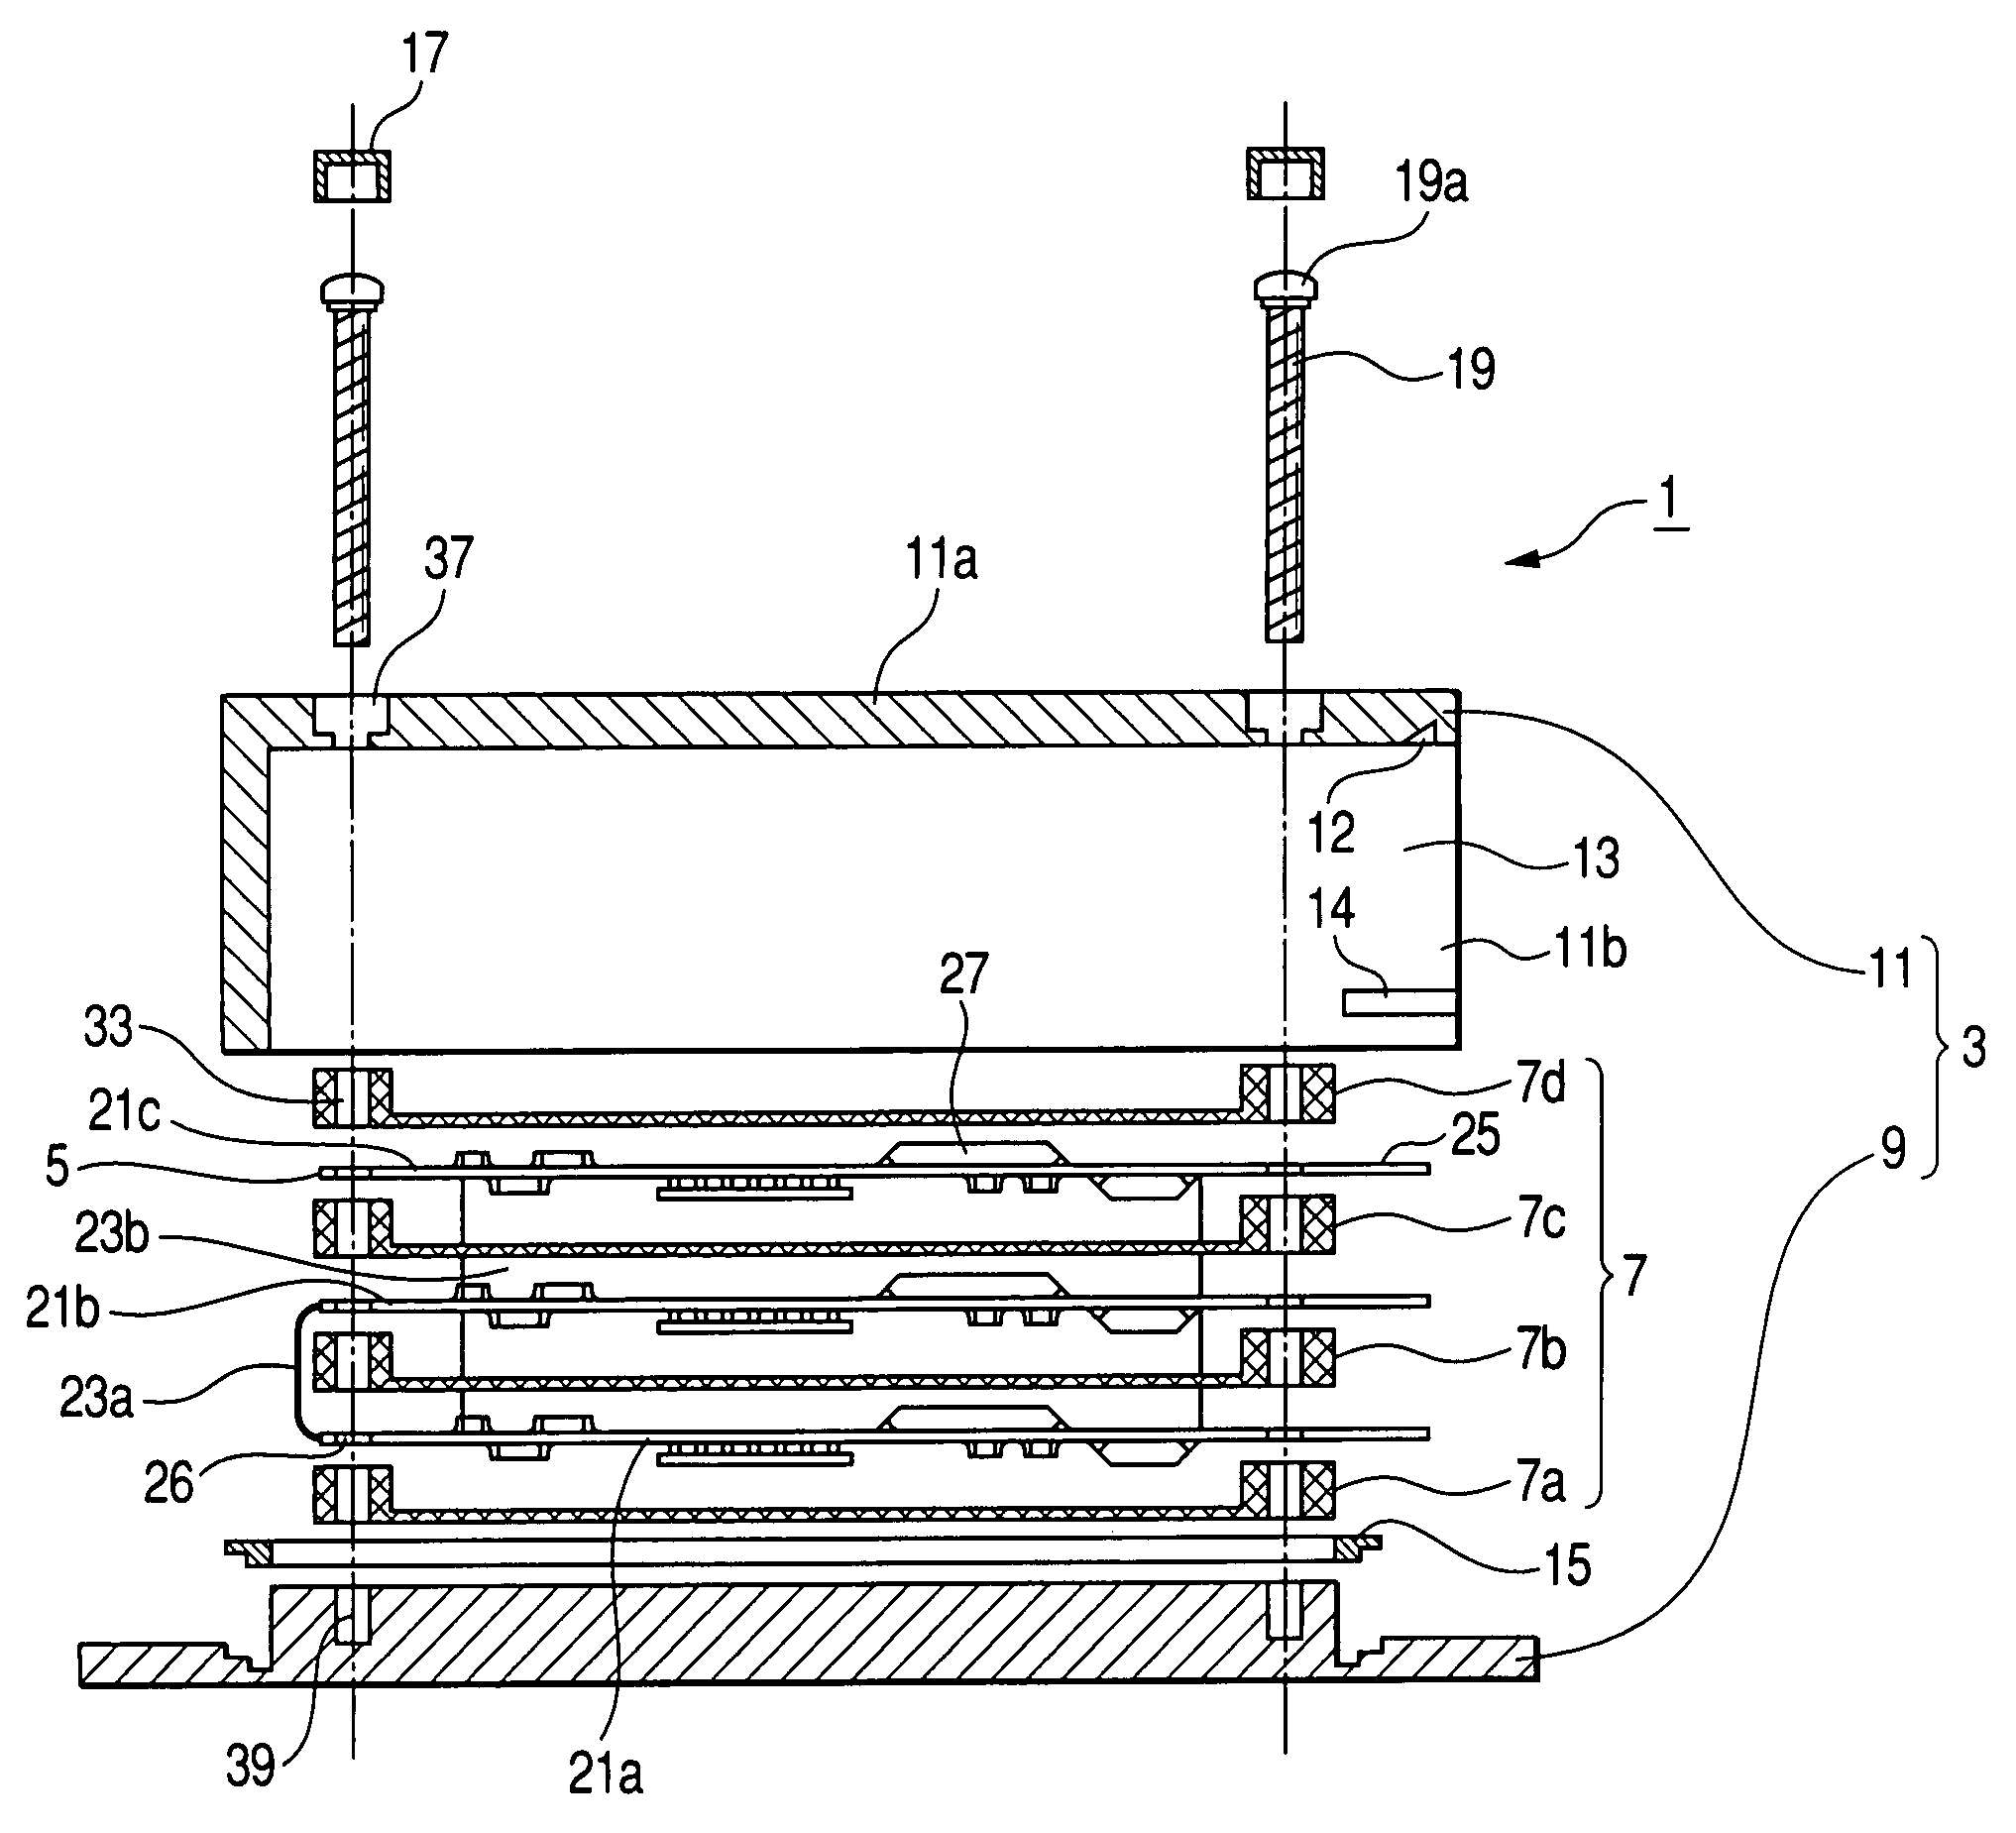 Multilayer electronic circuit device